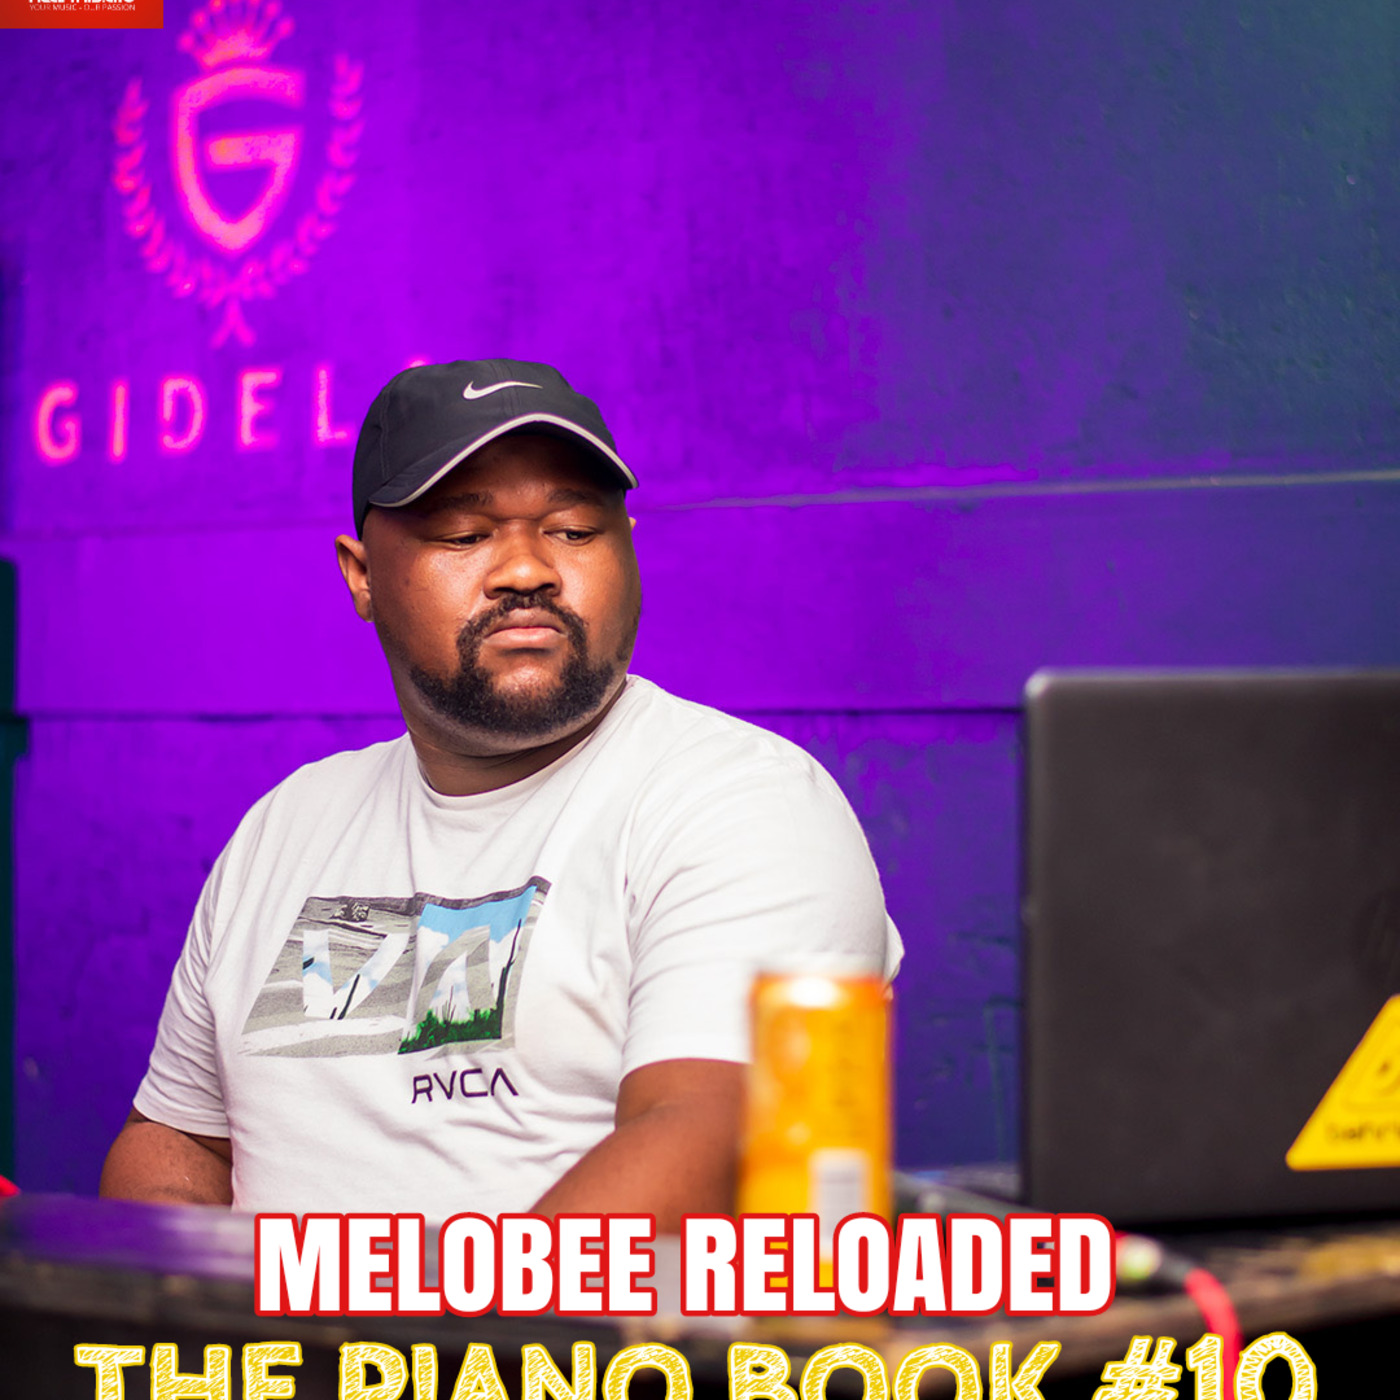 Melobee Reloaded - The Piano Book #10